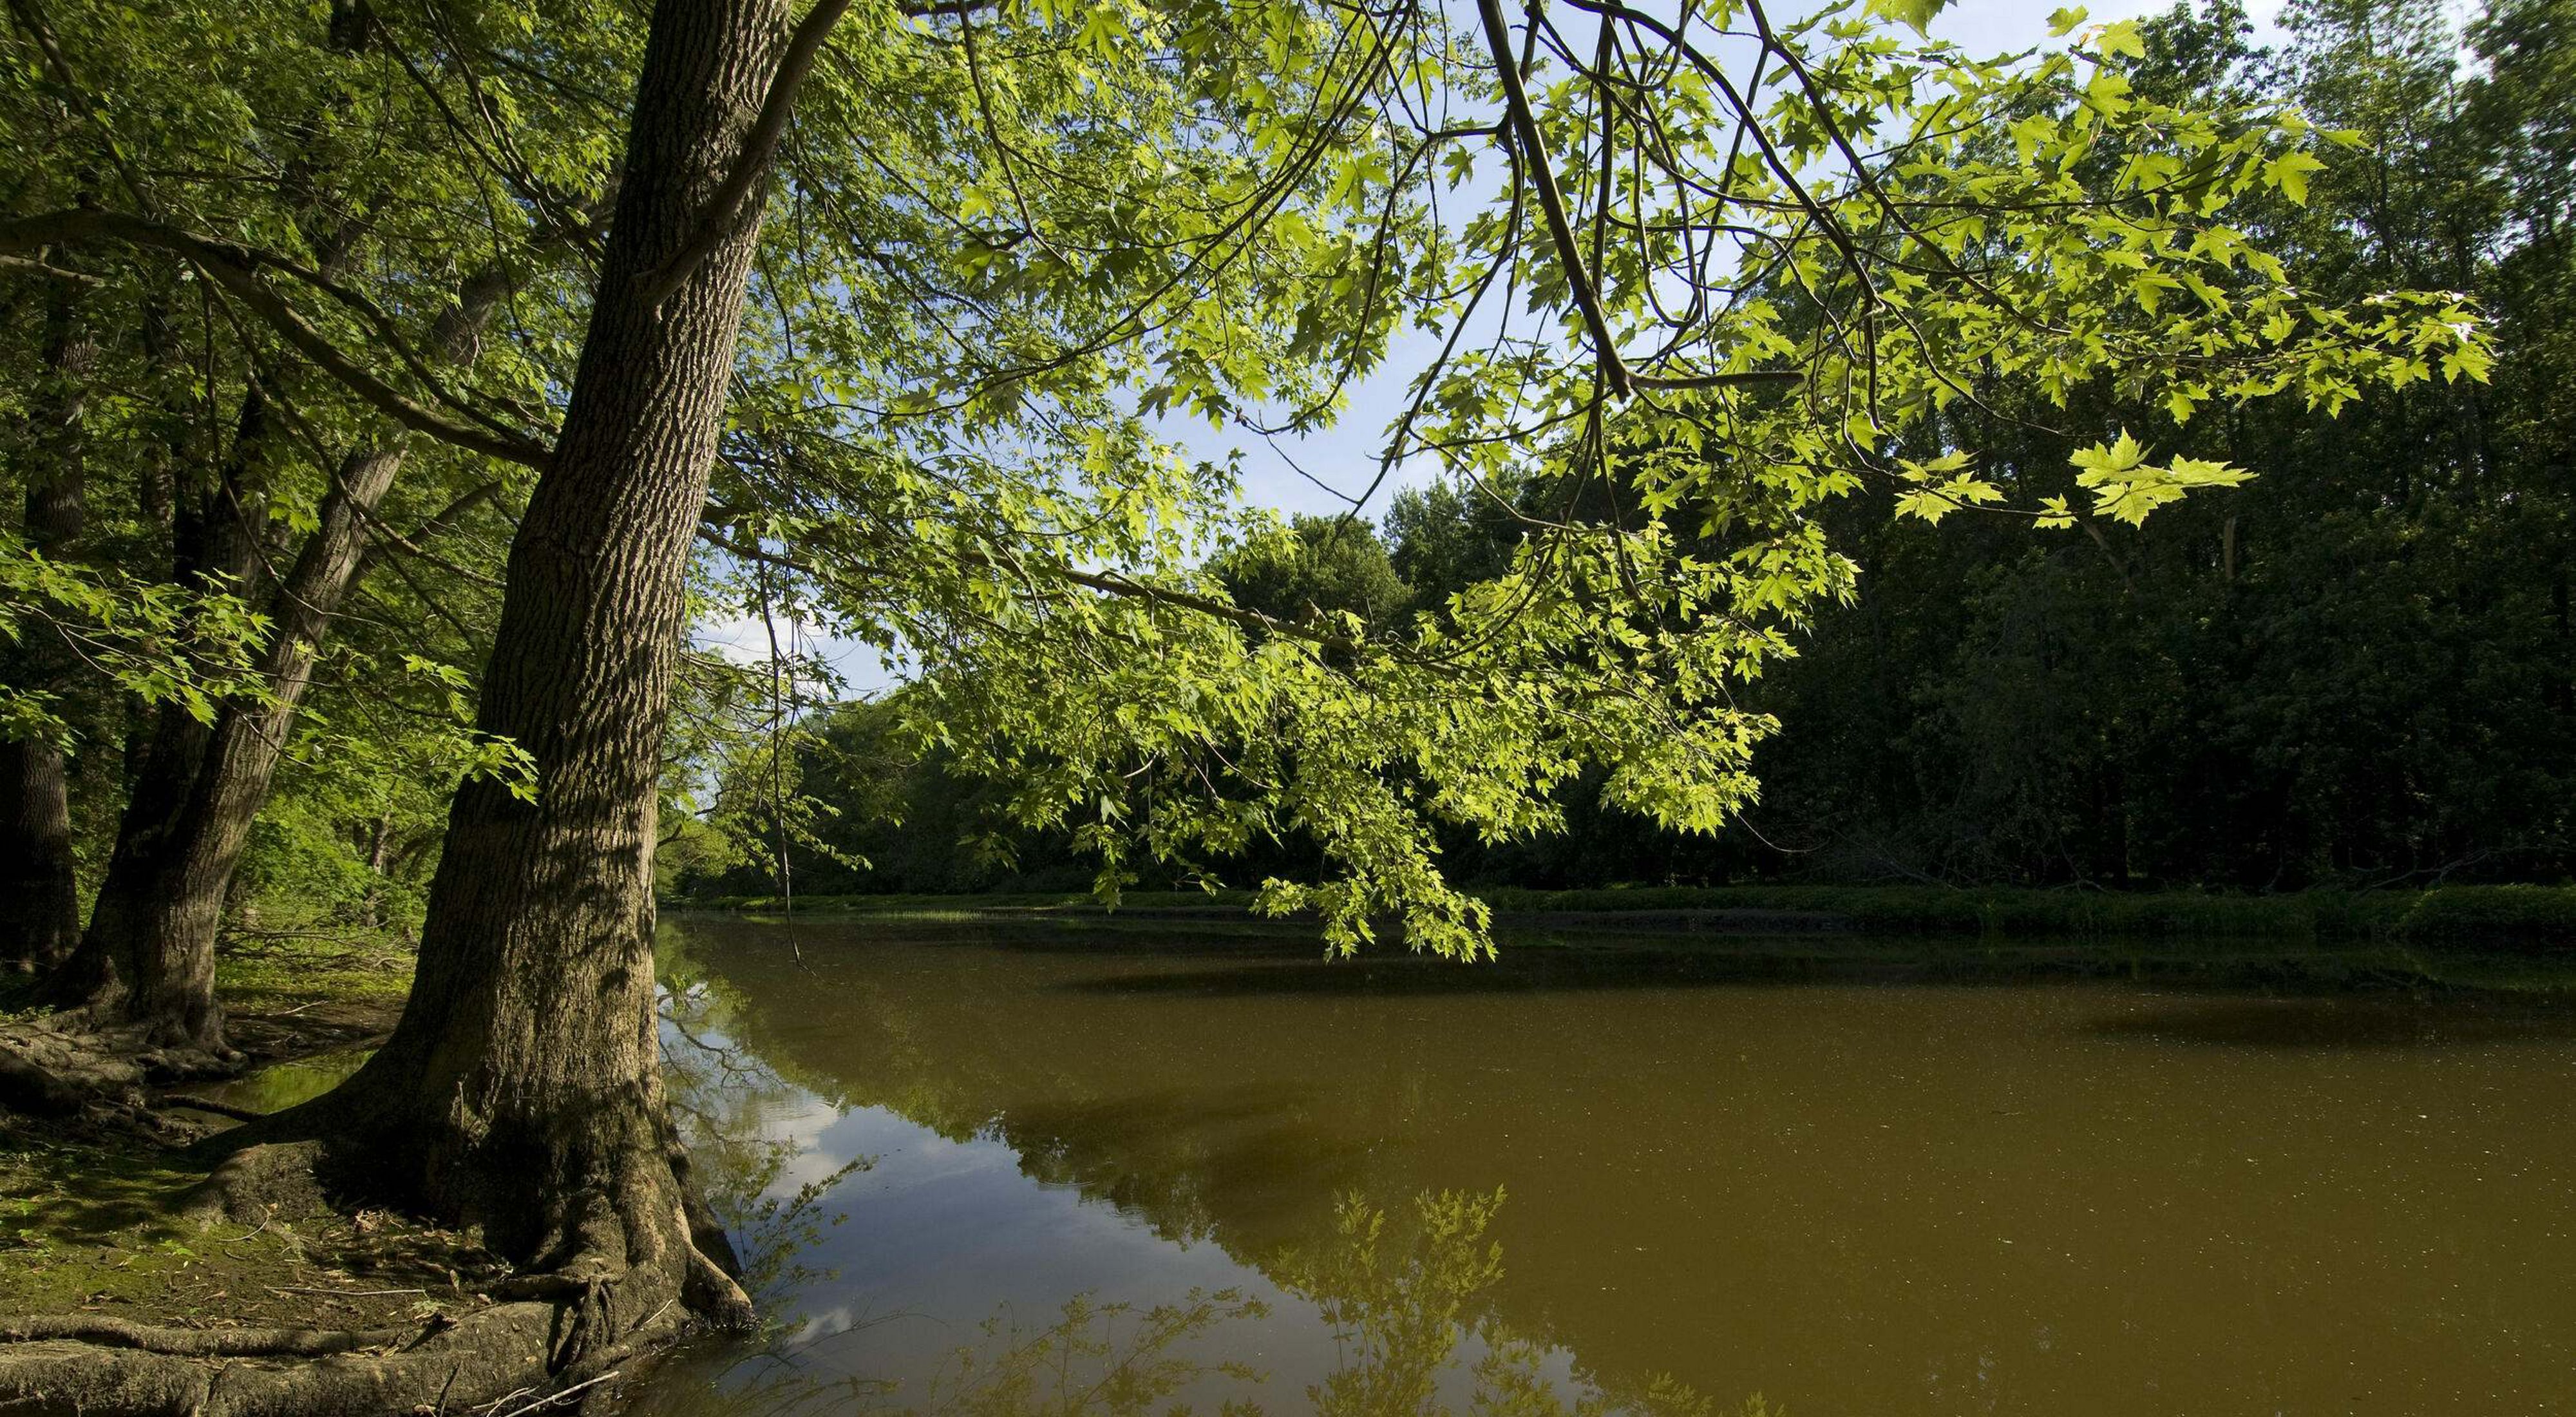 Trees with leafy branches situated alongside a slow-moving river.